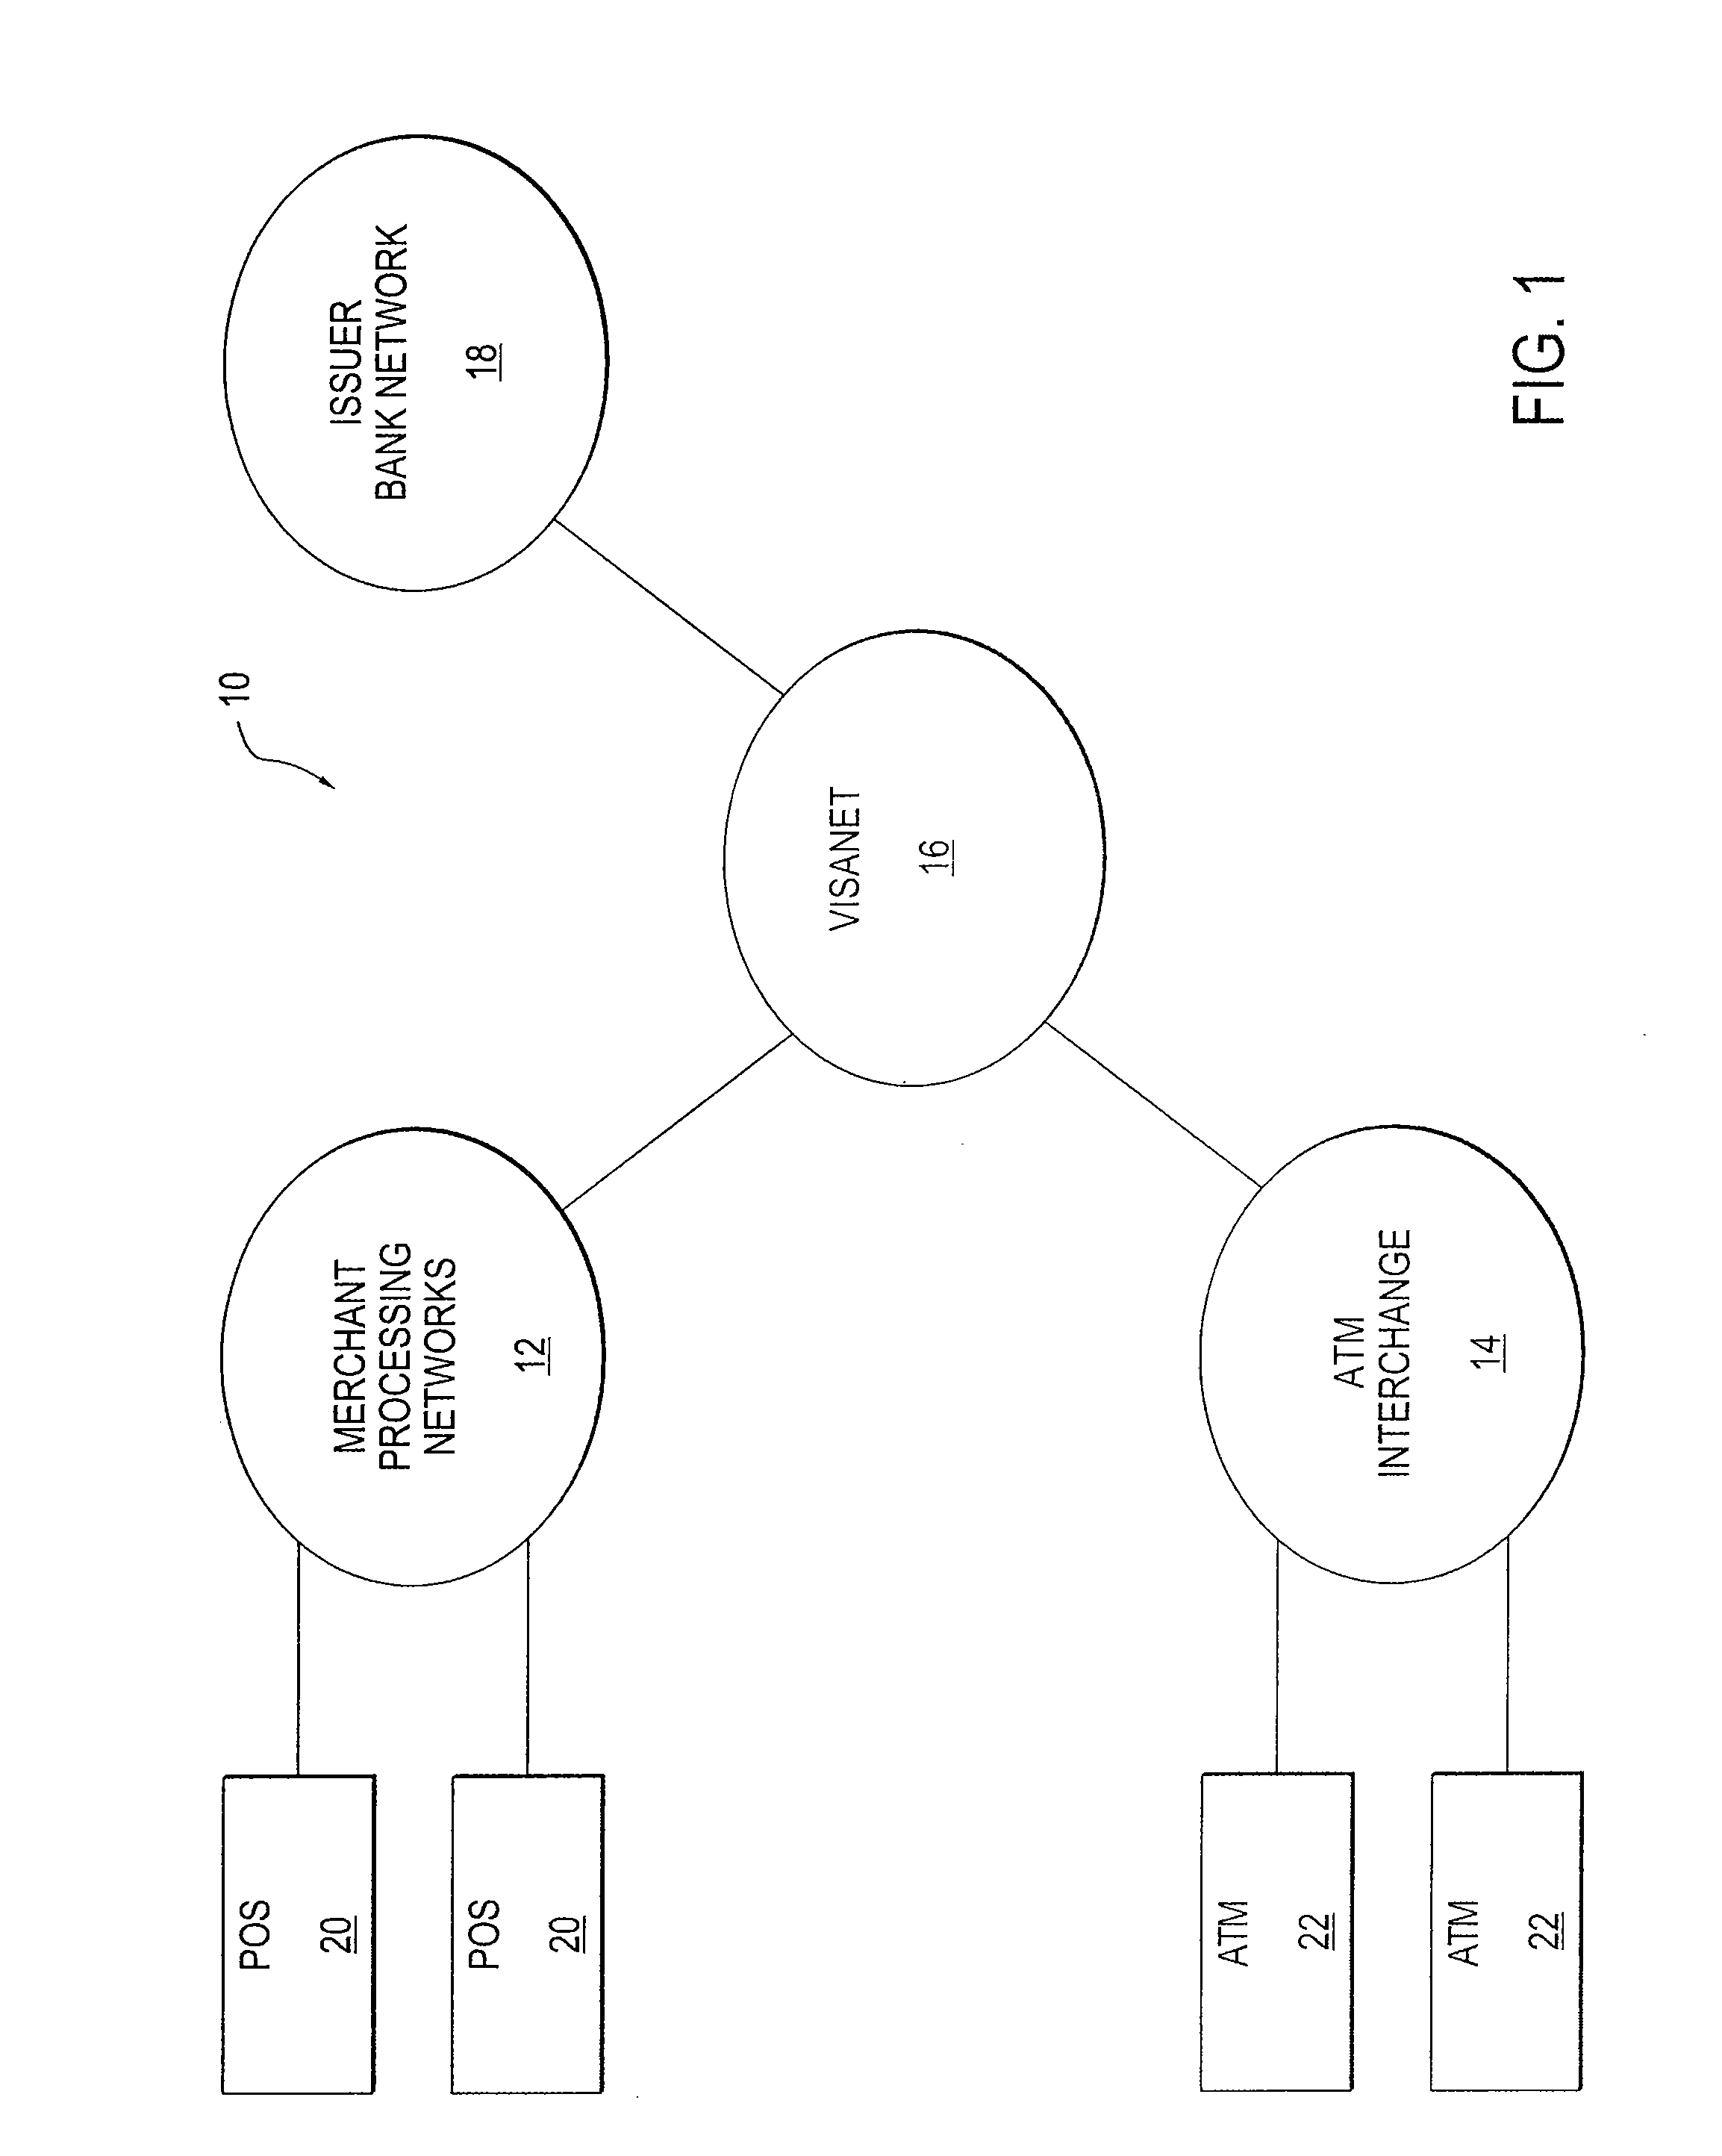 System for personal authorization control for card transactions